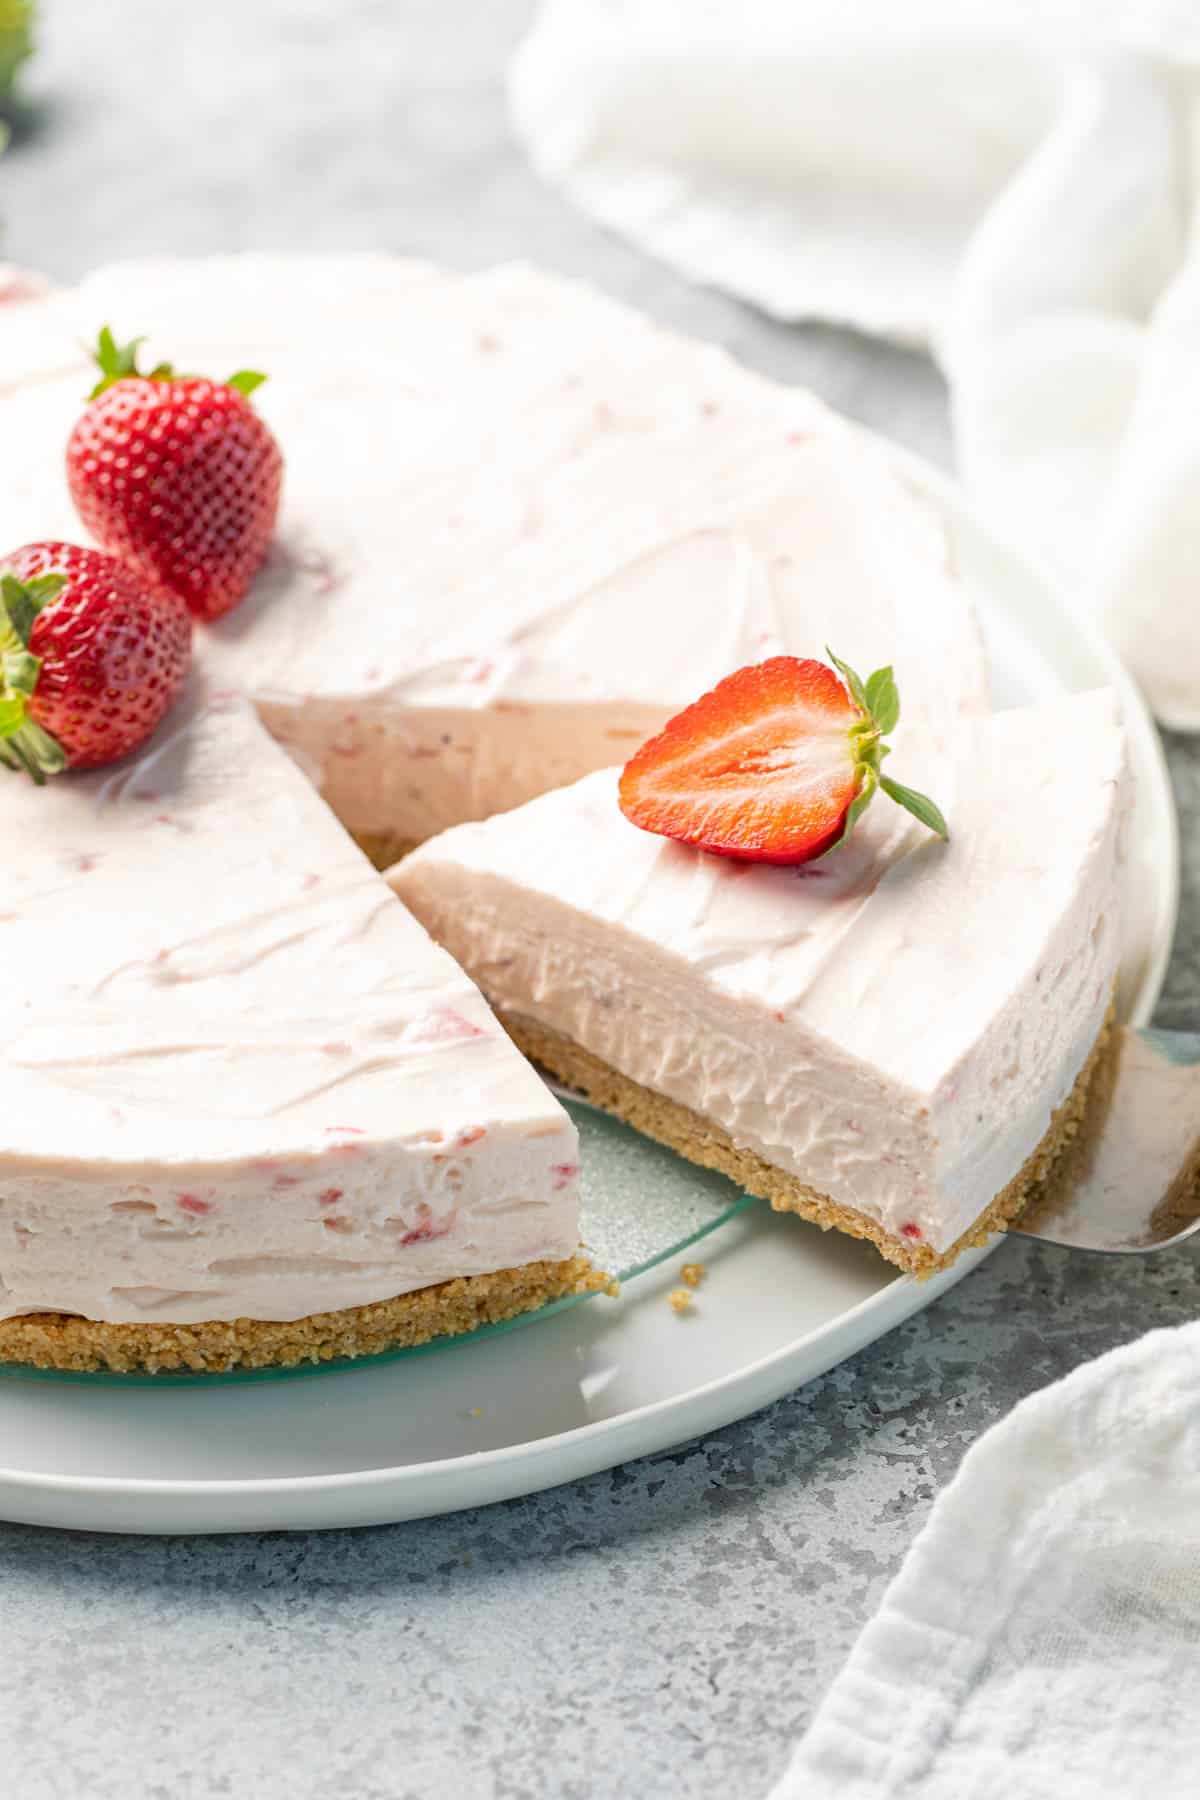 A slice of no bake strawberry cheesecake is removed with a pie server.